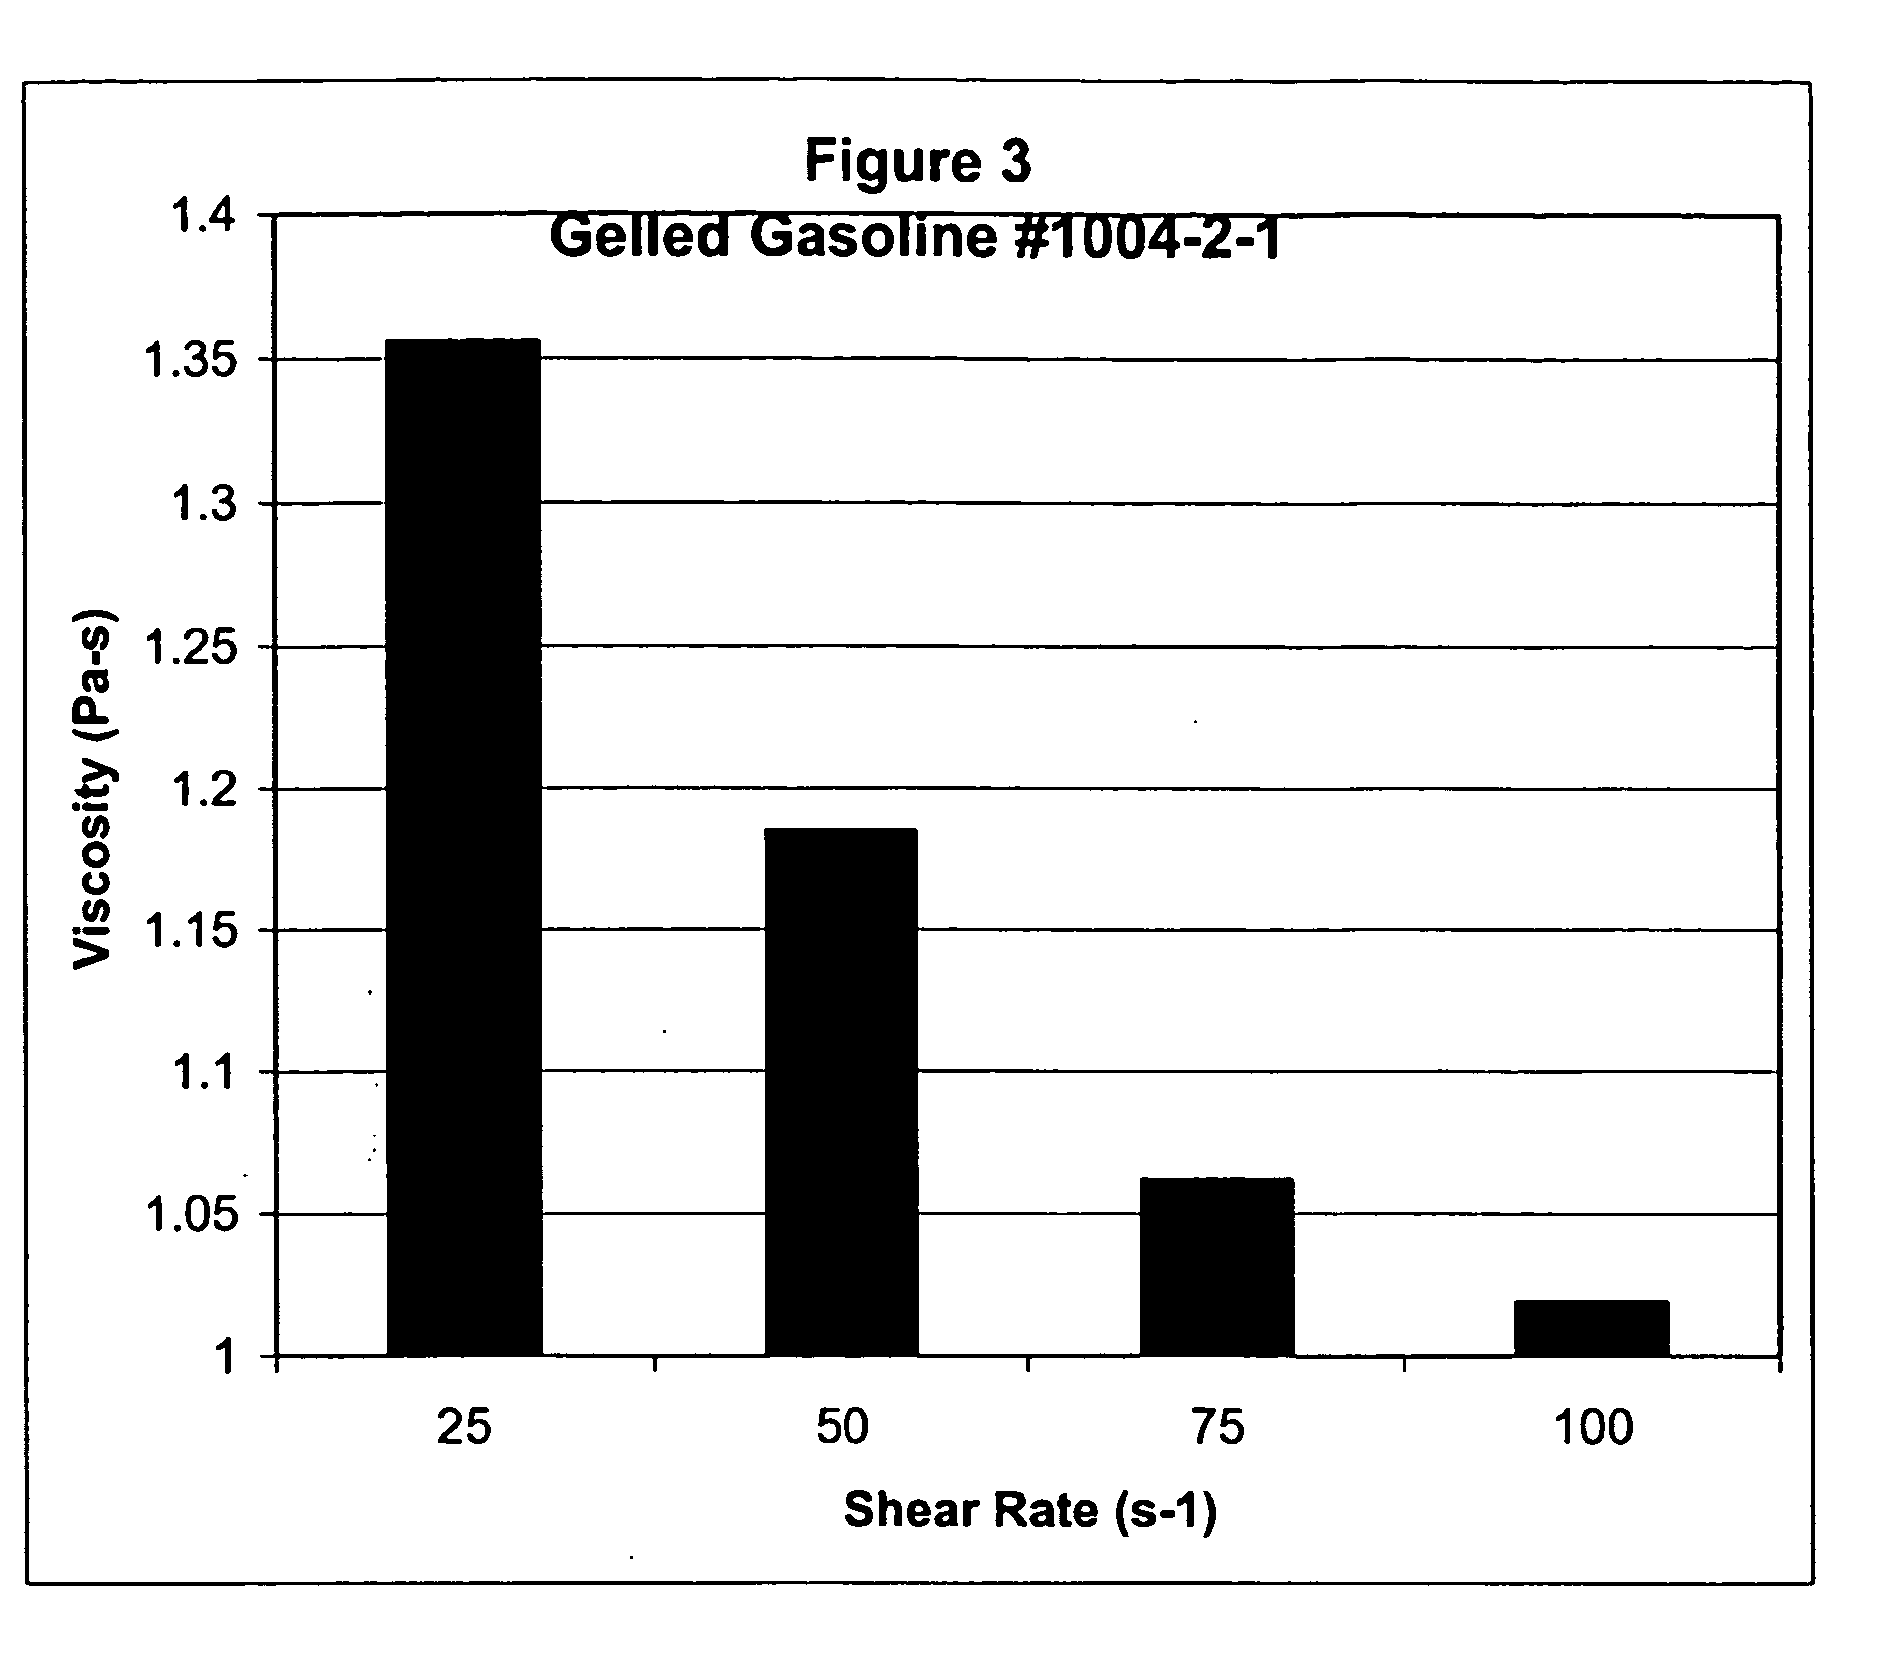 Reduced vapor pressure gelled fuels and solvents